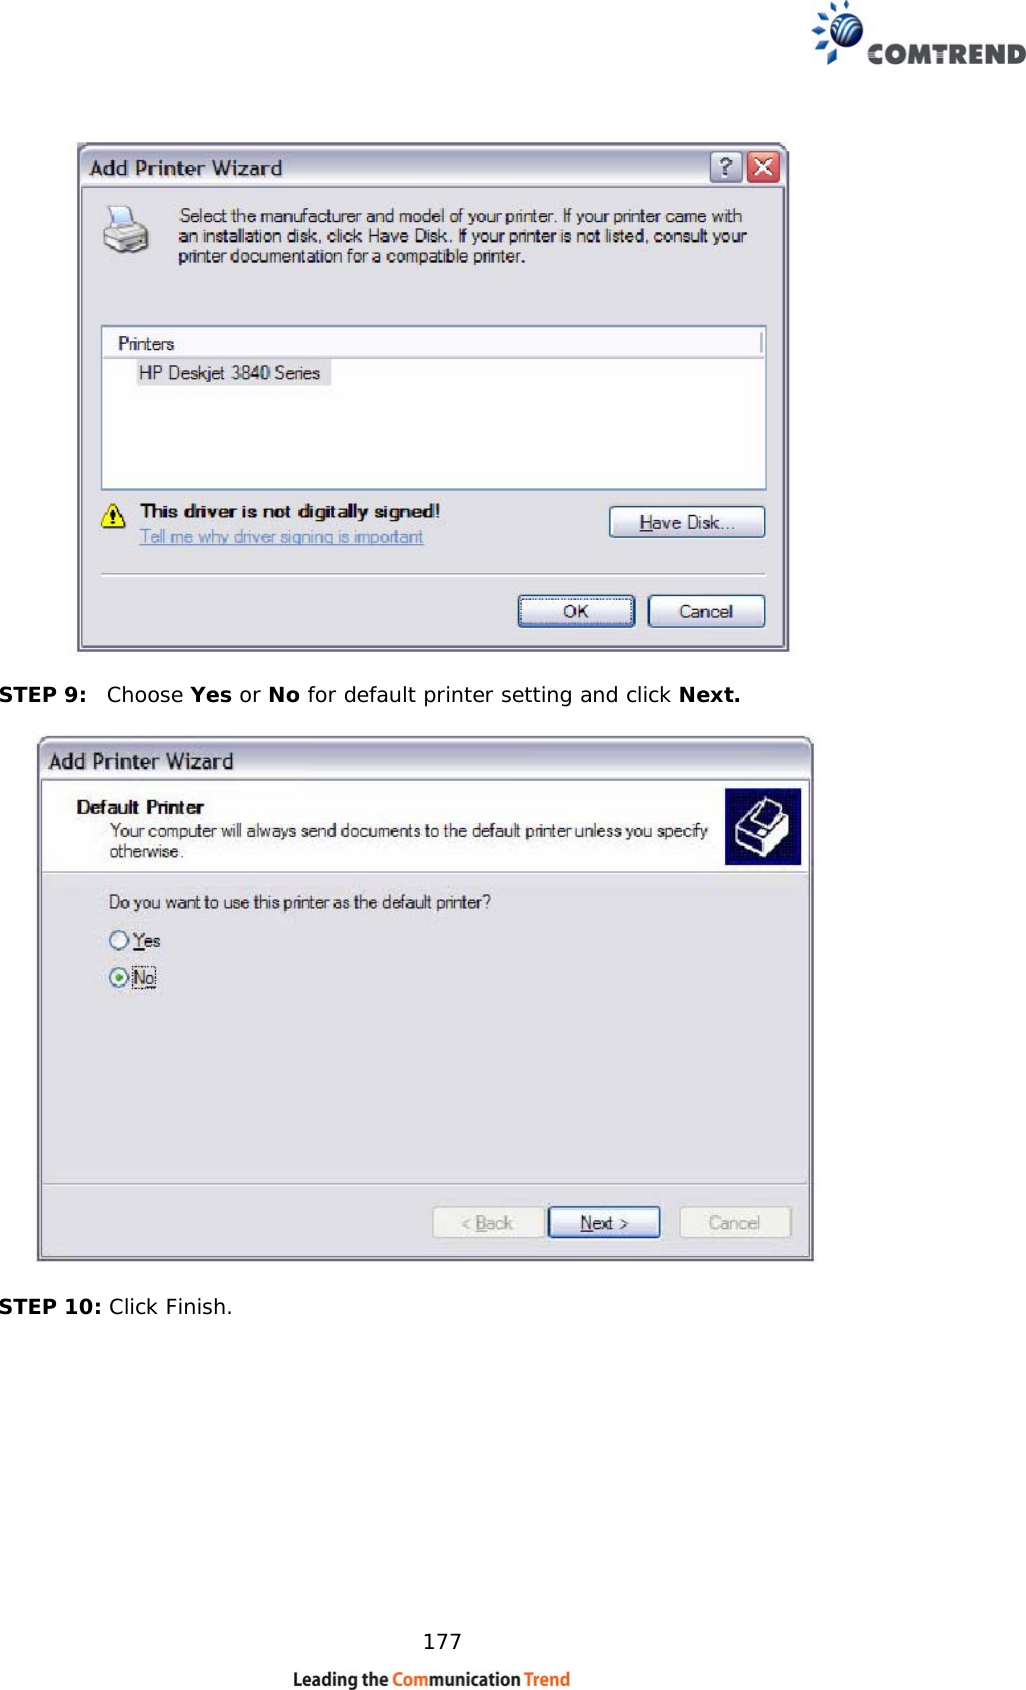    177   STEP 9:  Choose Yes or No for default printer setting and click Next.    STEP 10: Click Finish.         